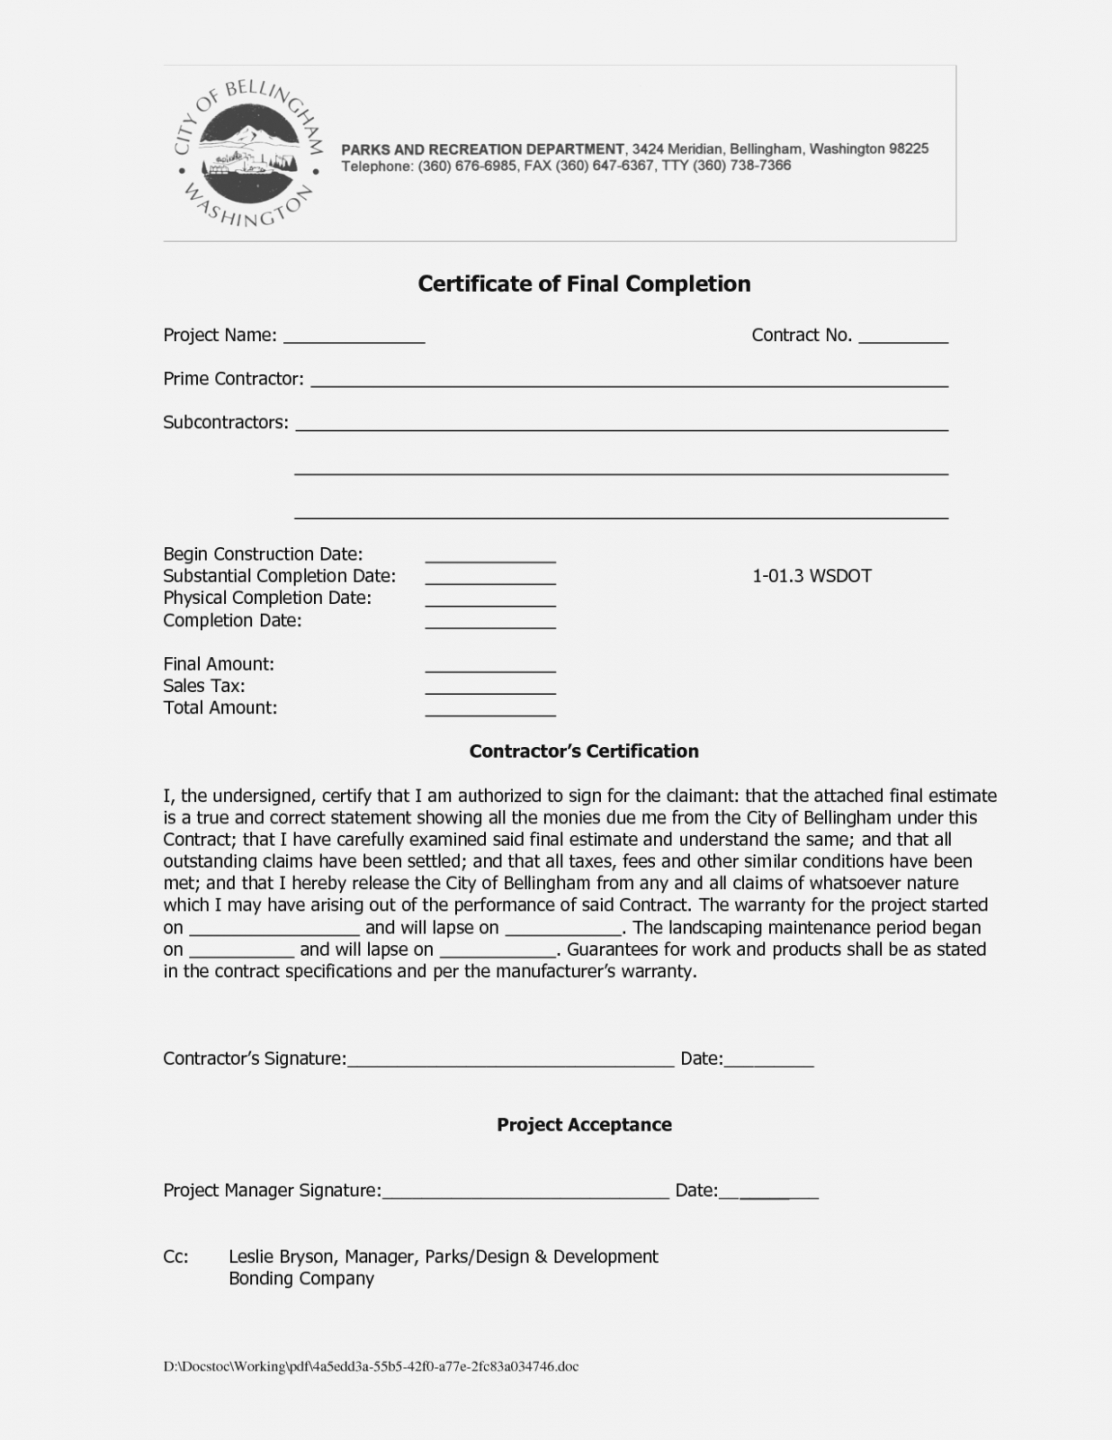 Roofing Certificate Of Completion Template Pertaining To Certificate Of Substantial Completion Template